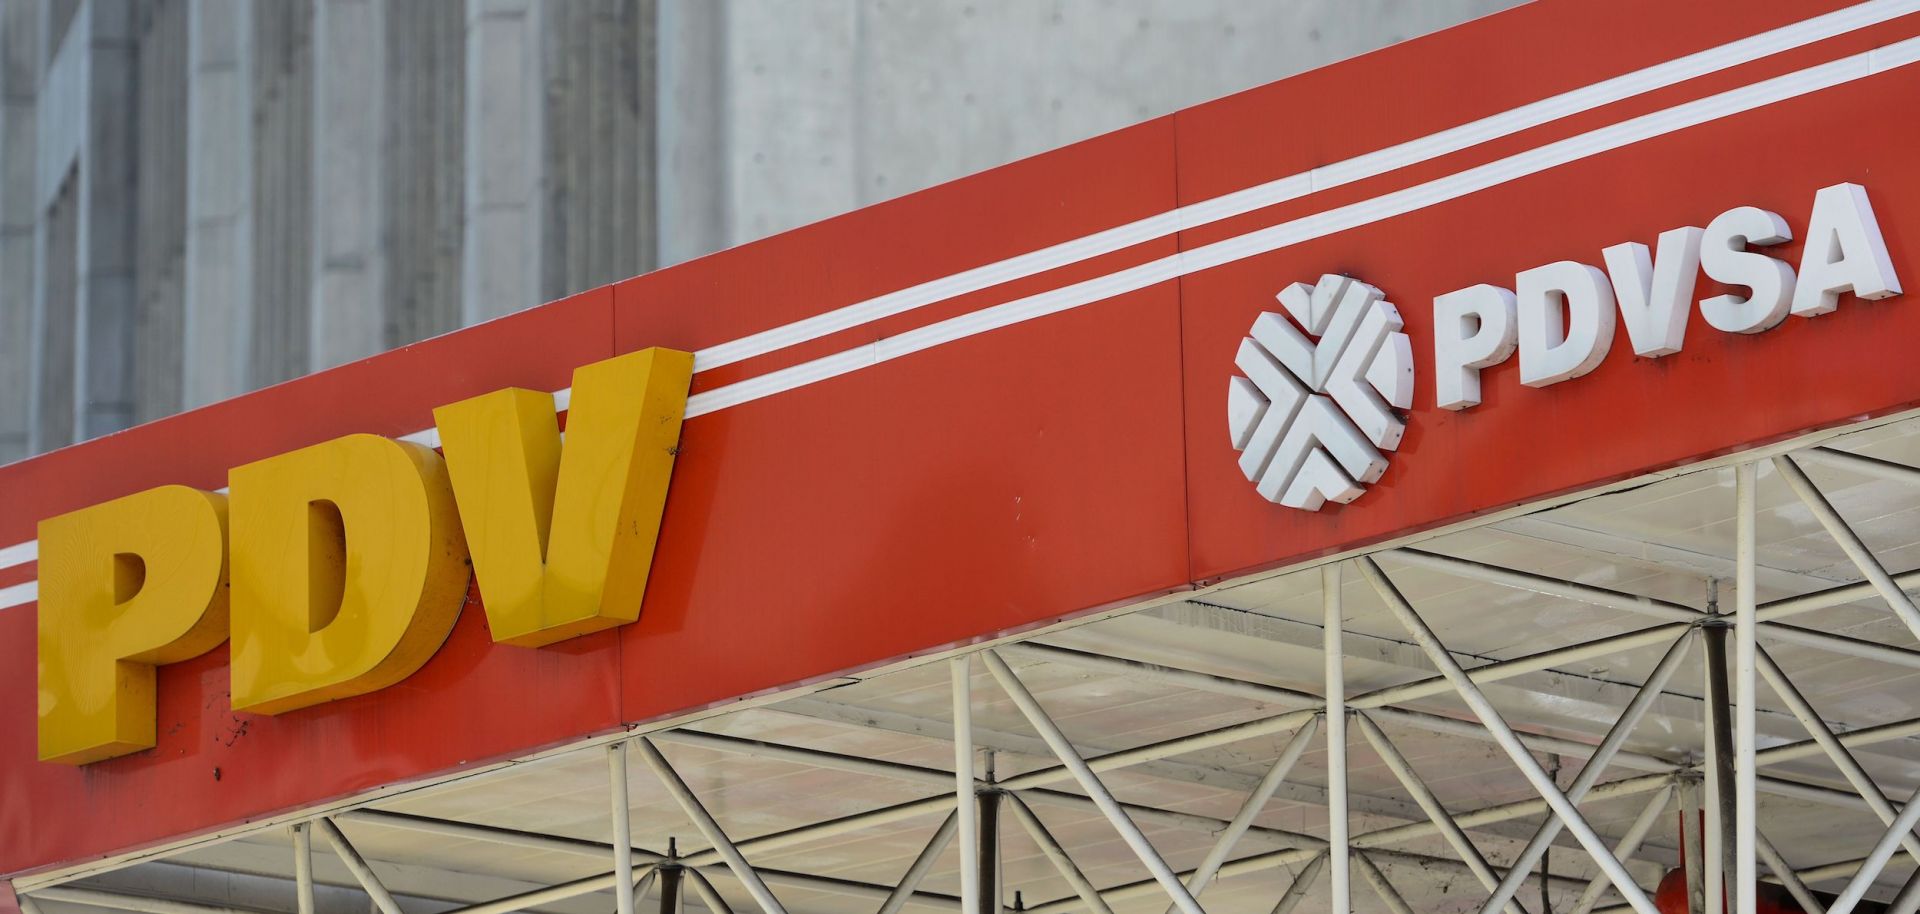 A photograph shows the logo of Venezuelan state-owned oil company PDVSA at a gas station in Caracas during November 2017.